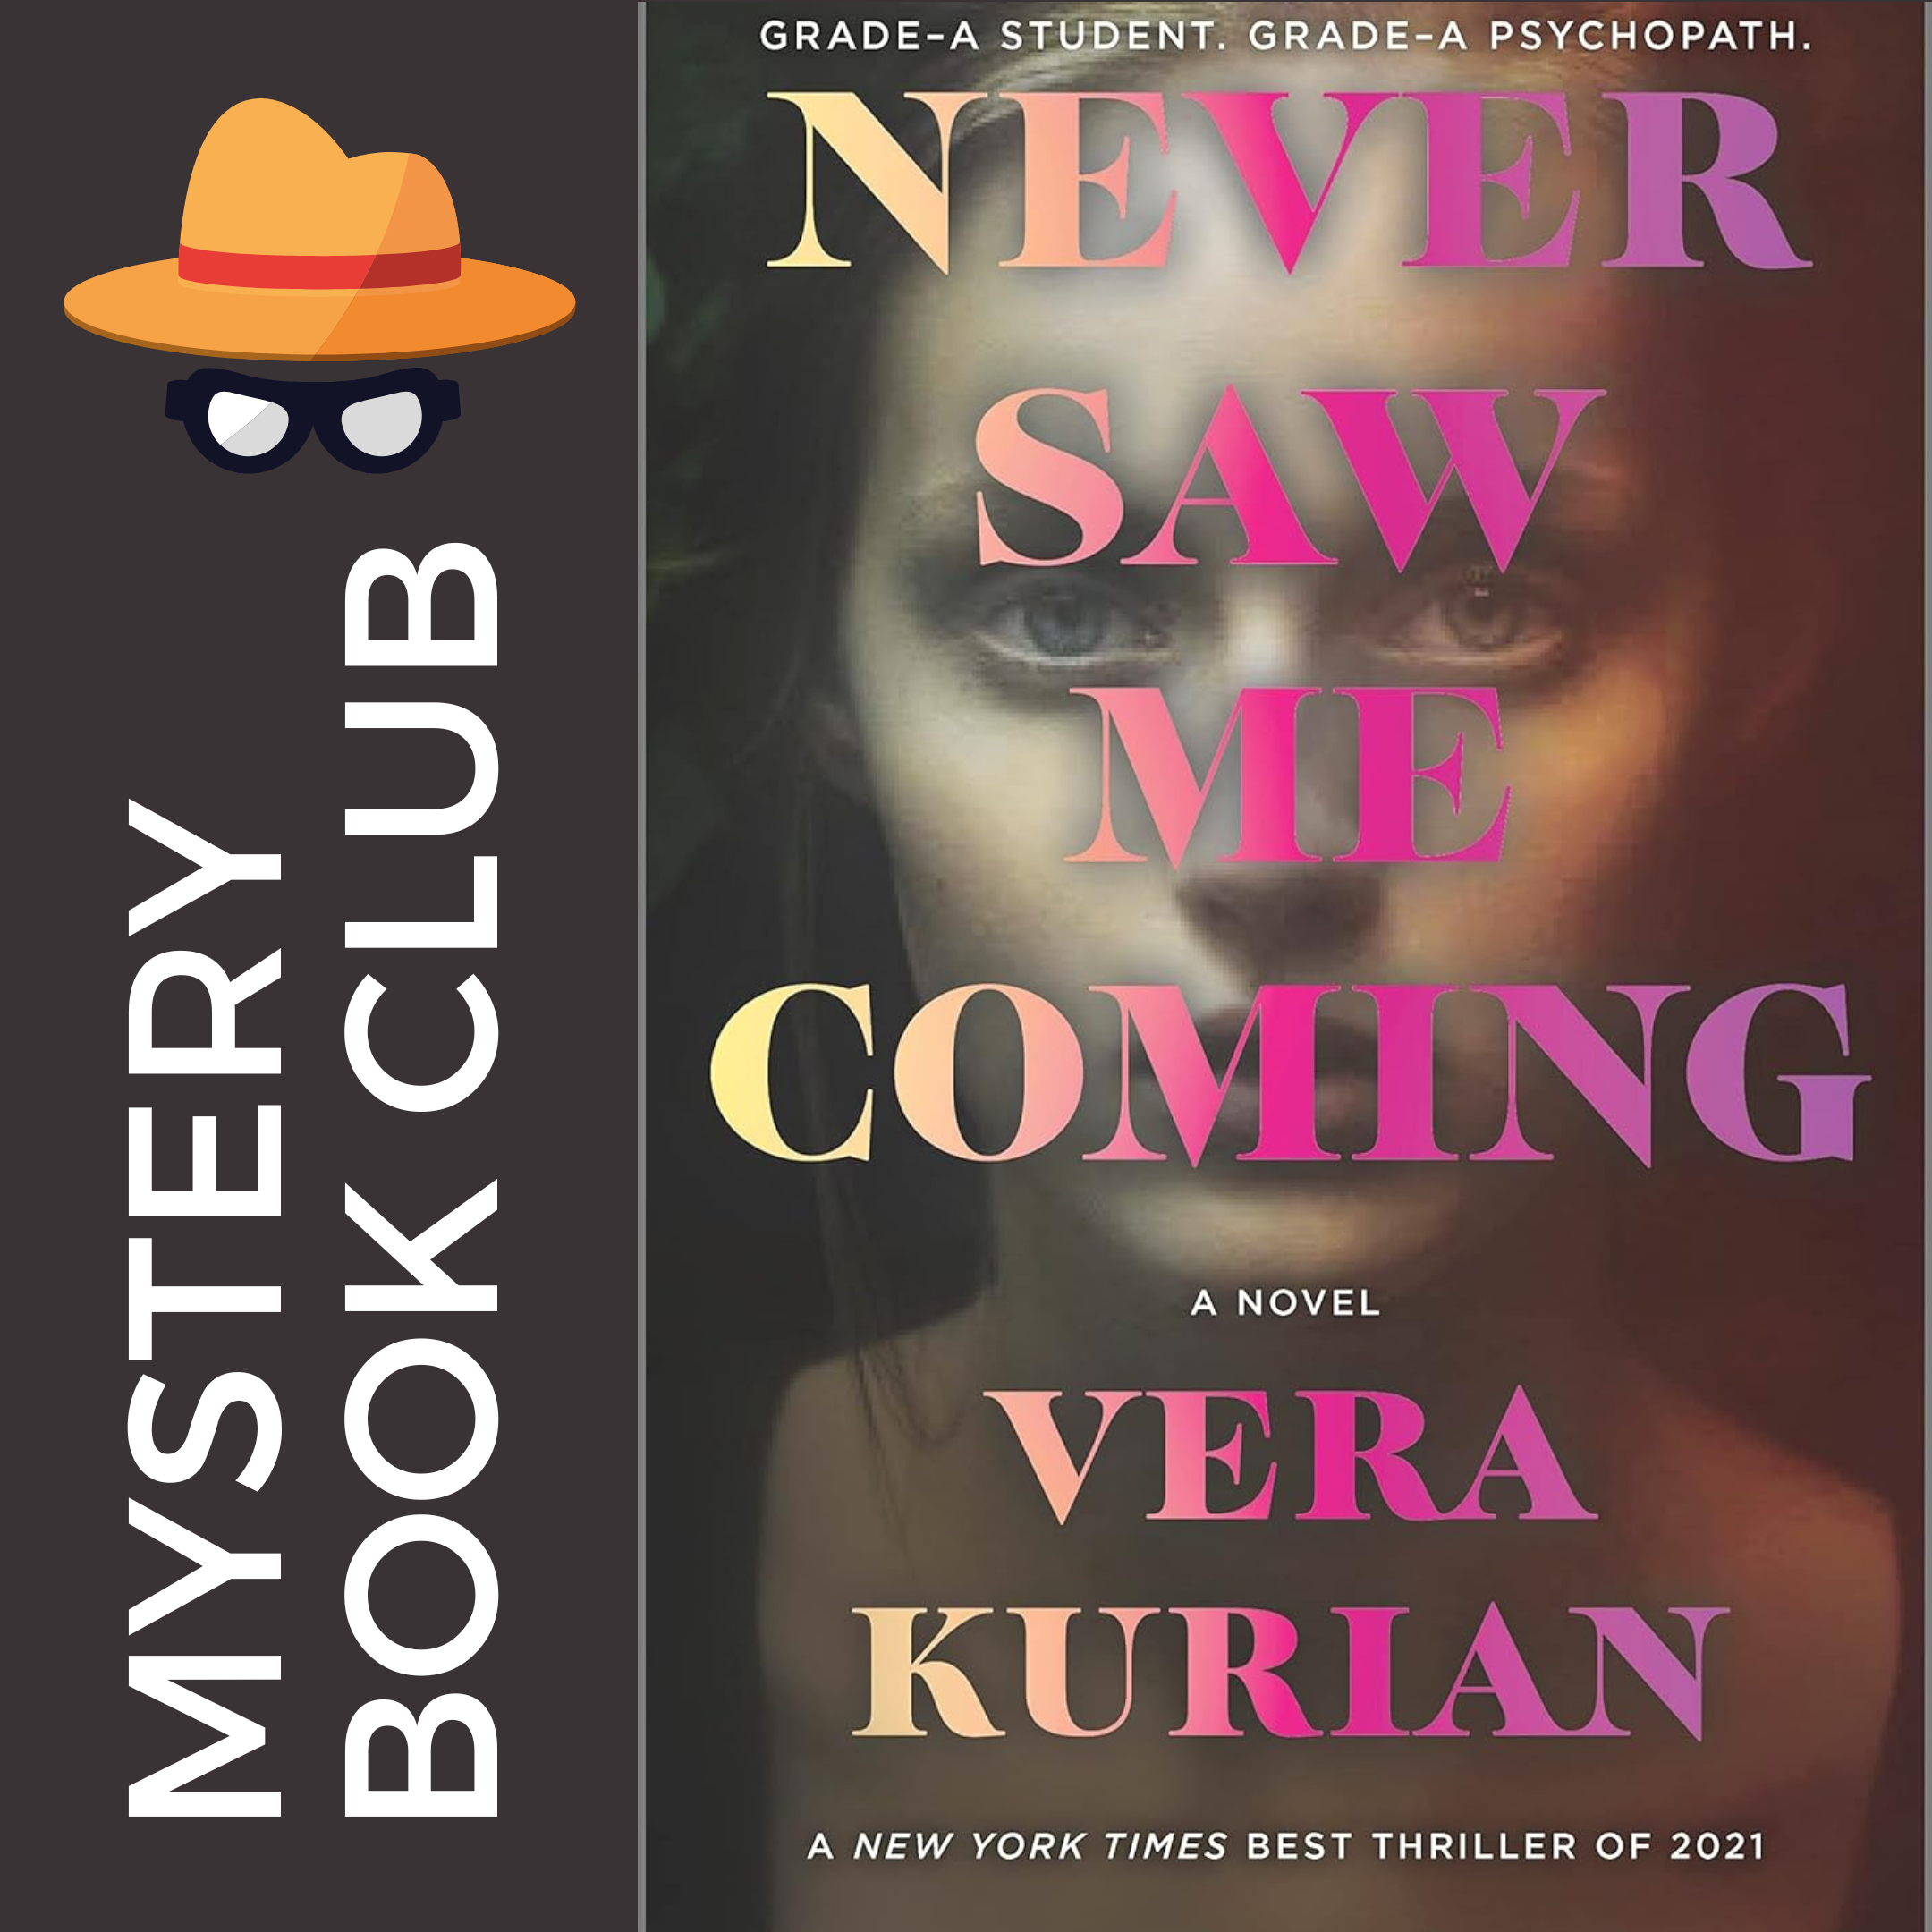 dark brown gray background, white text reads mystery book club with an image if a fedora and spectacles.  front cover image of book cover never saw me coming by vera kurian